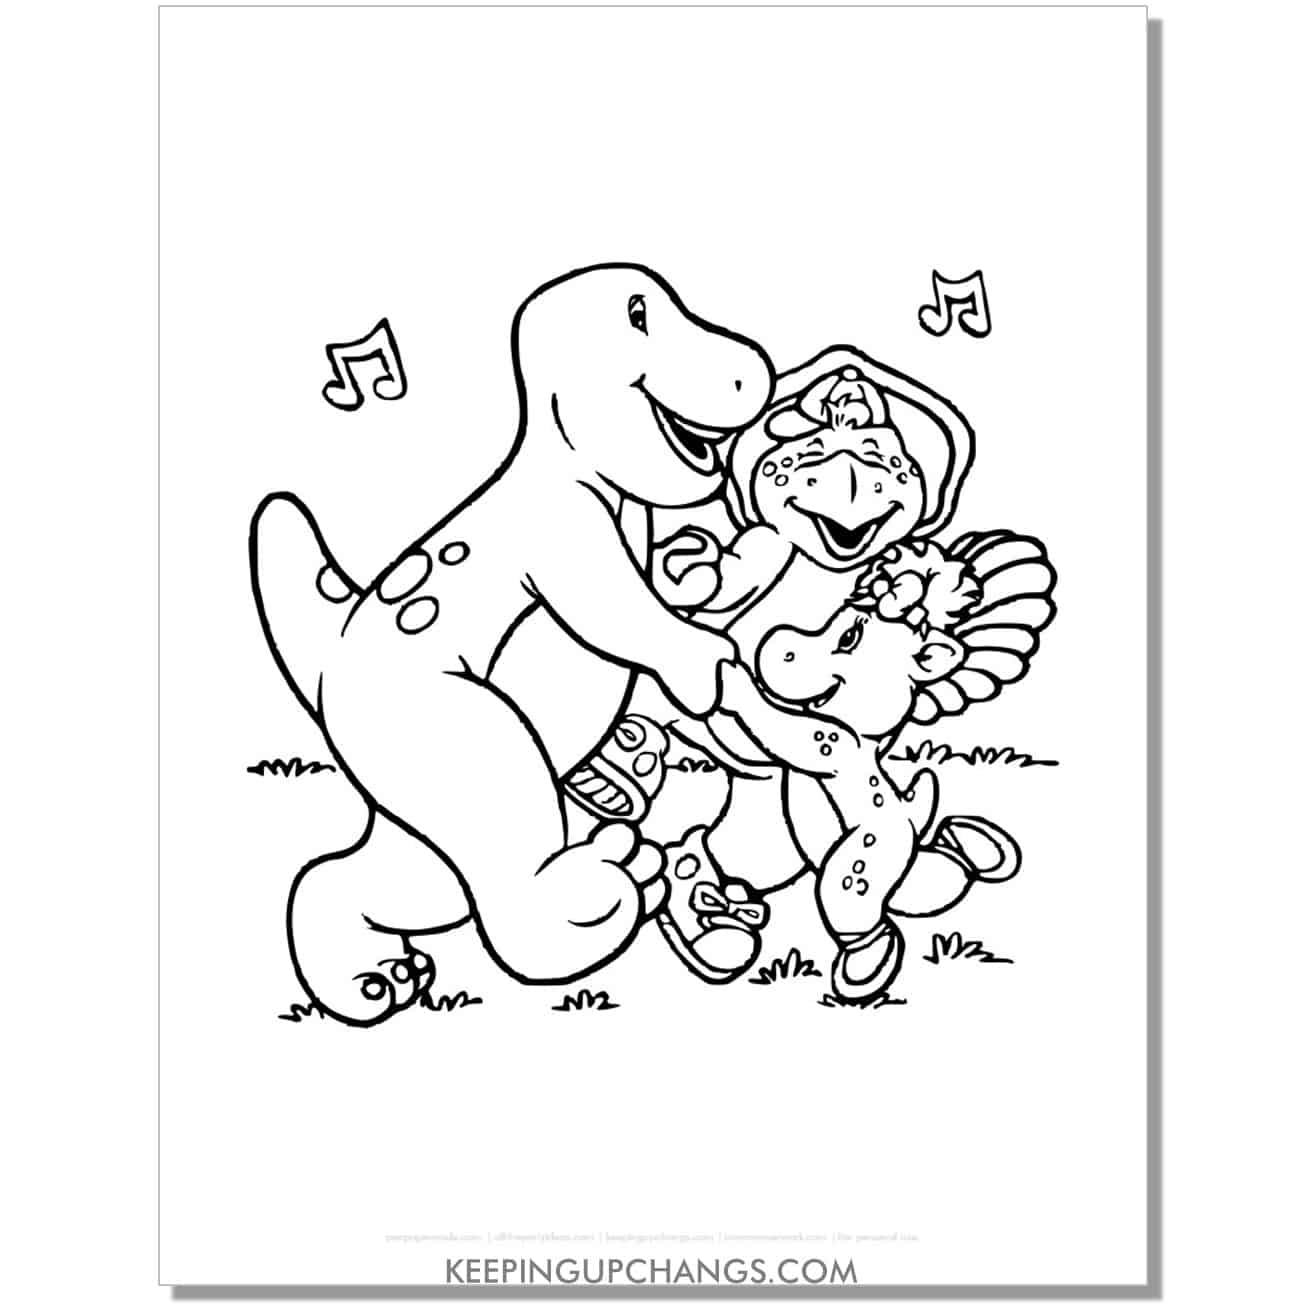 free baby bop, bj, barney singing happy birthday song coloring page, sheet.